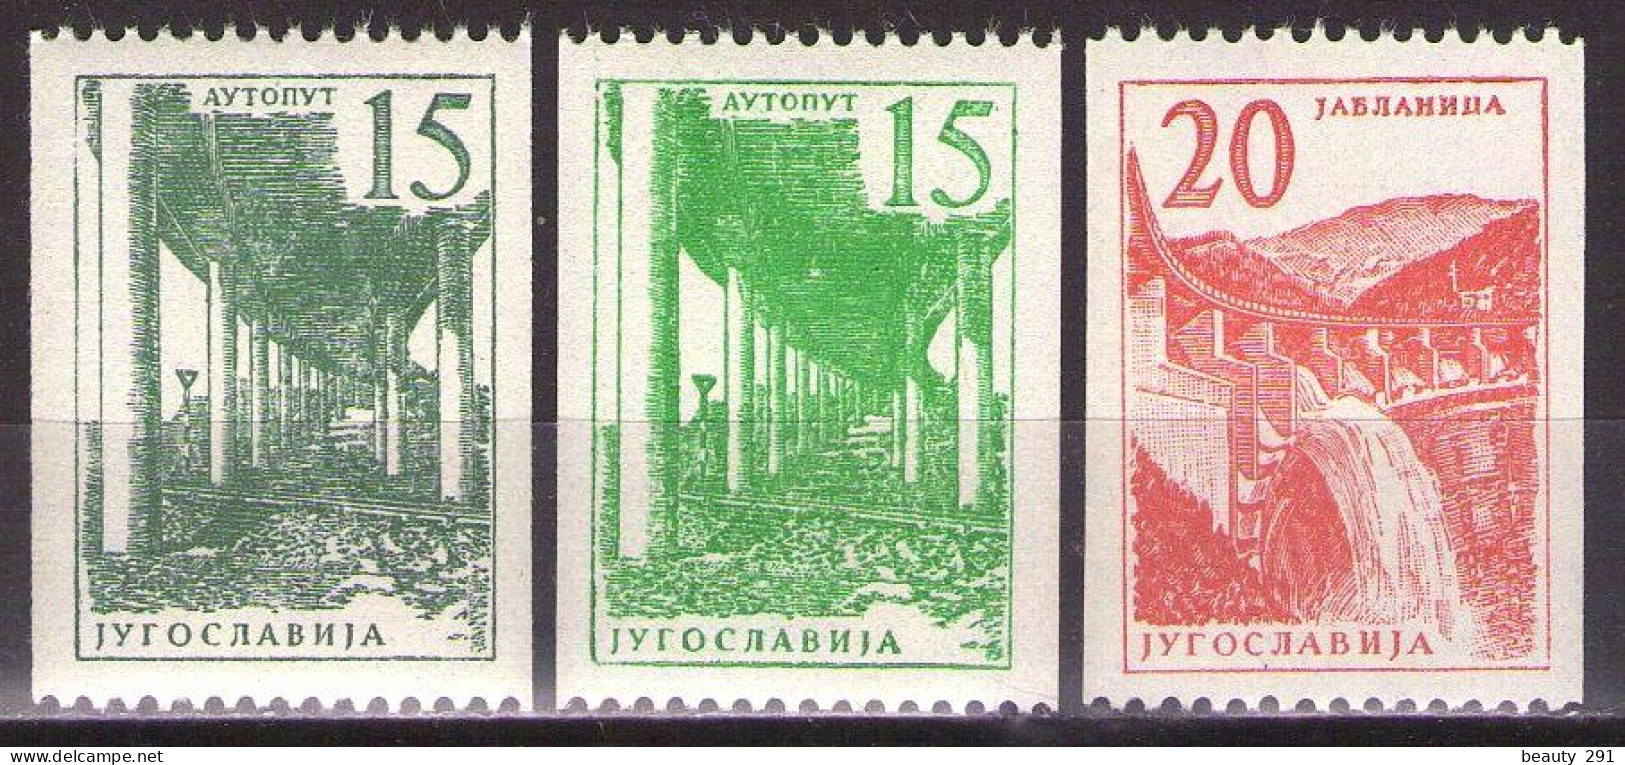 Yugoslavia 1959 - Industry And Architecture Coil Stamps - Mi 898-899a,b - MNH**VF - Neufs